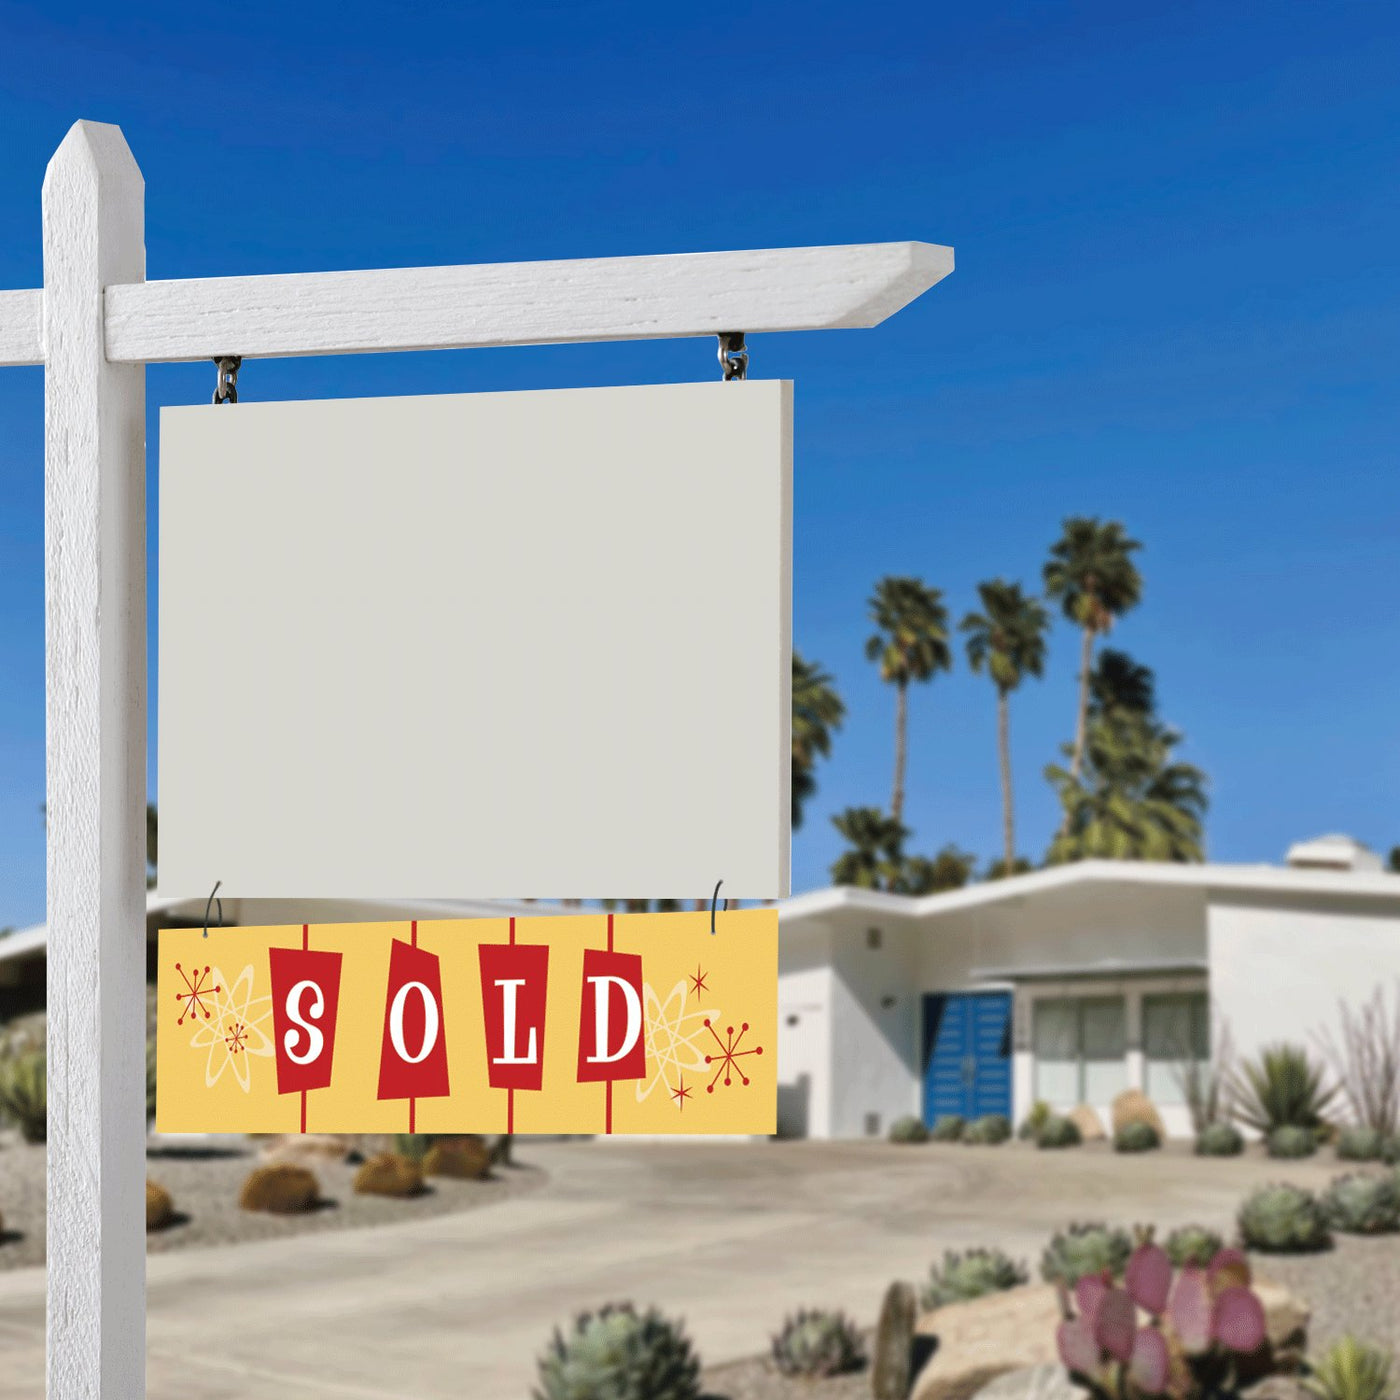 Sold - Mid Century - All Things Real Estate